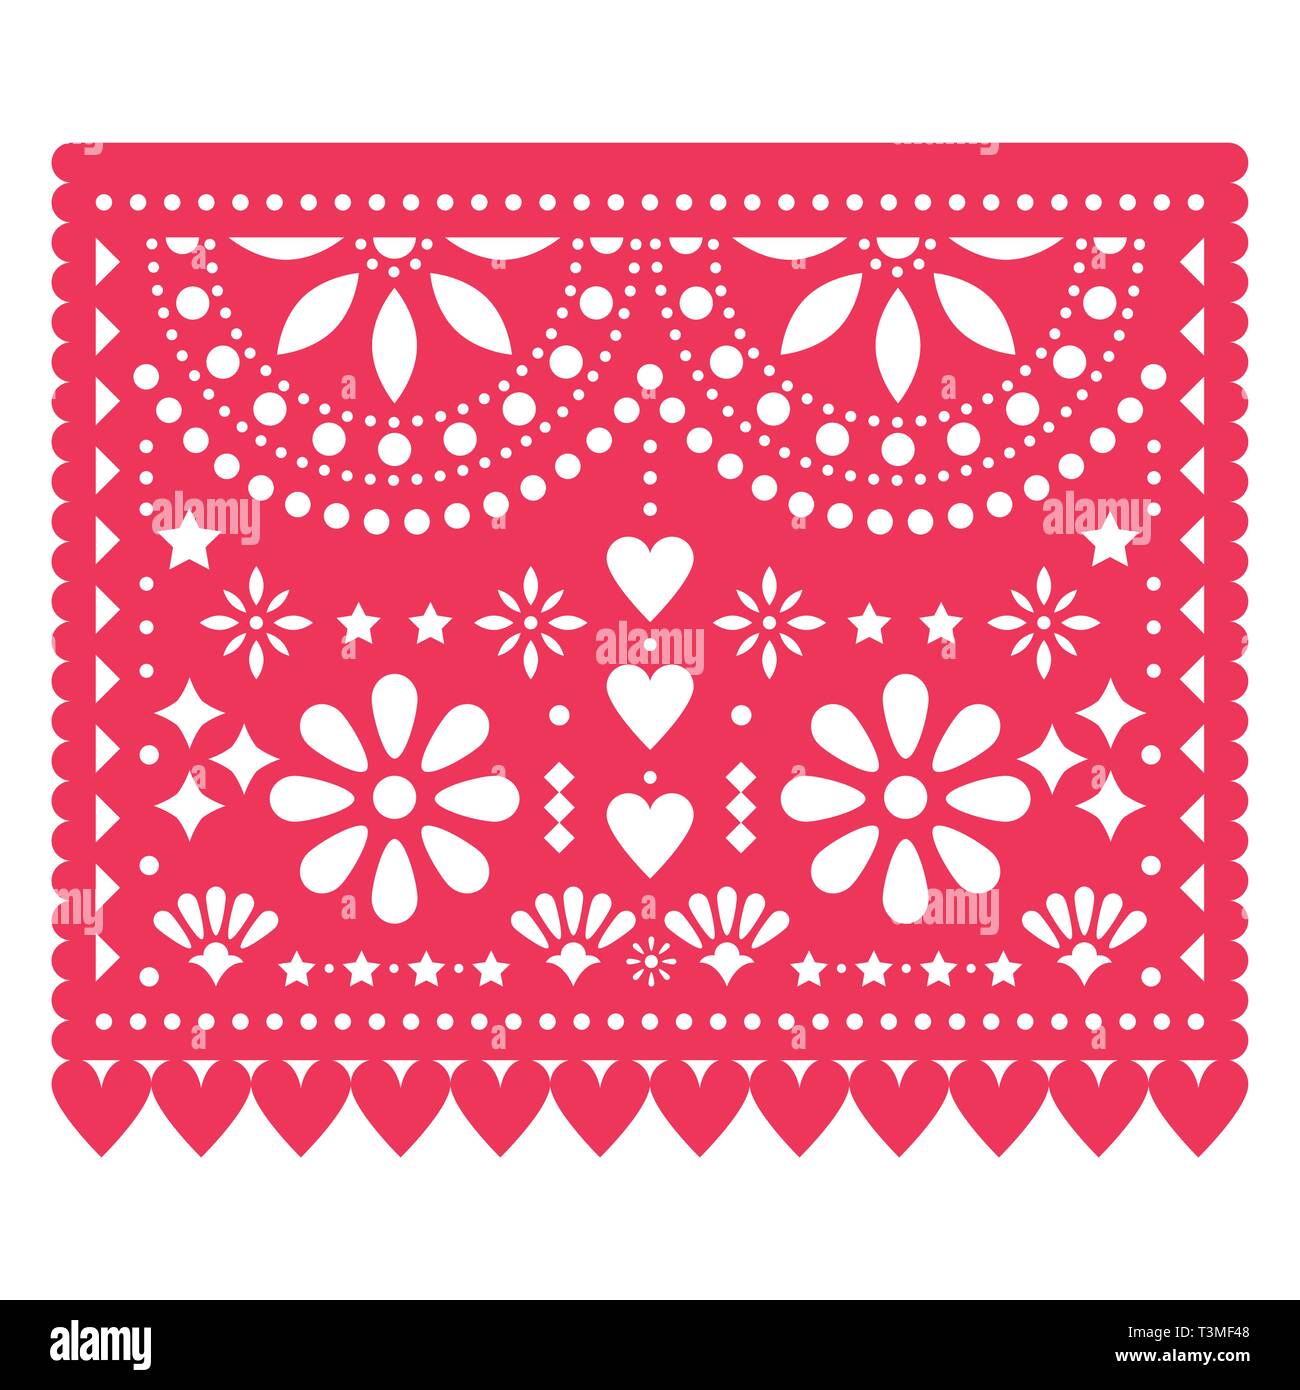 Papel Picado vector floral template design with abstract shapes, Mexican paper decorations pattern in pink red, traditional fiesta banner Stock Vector